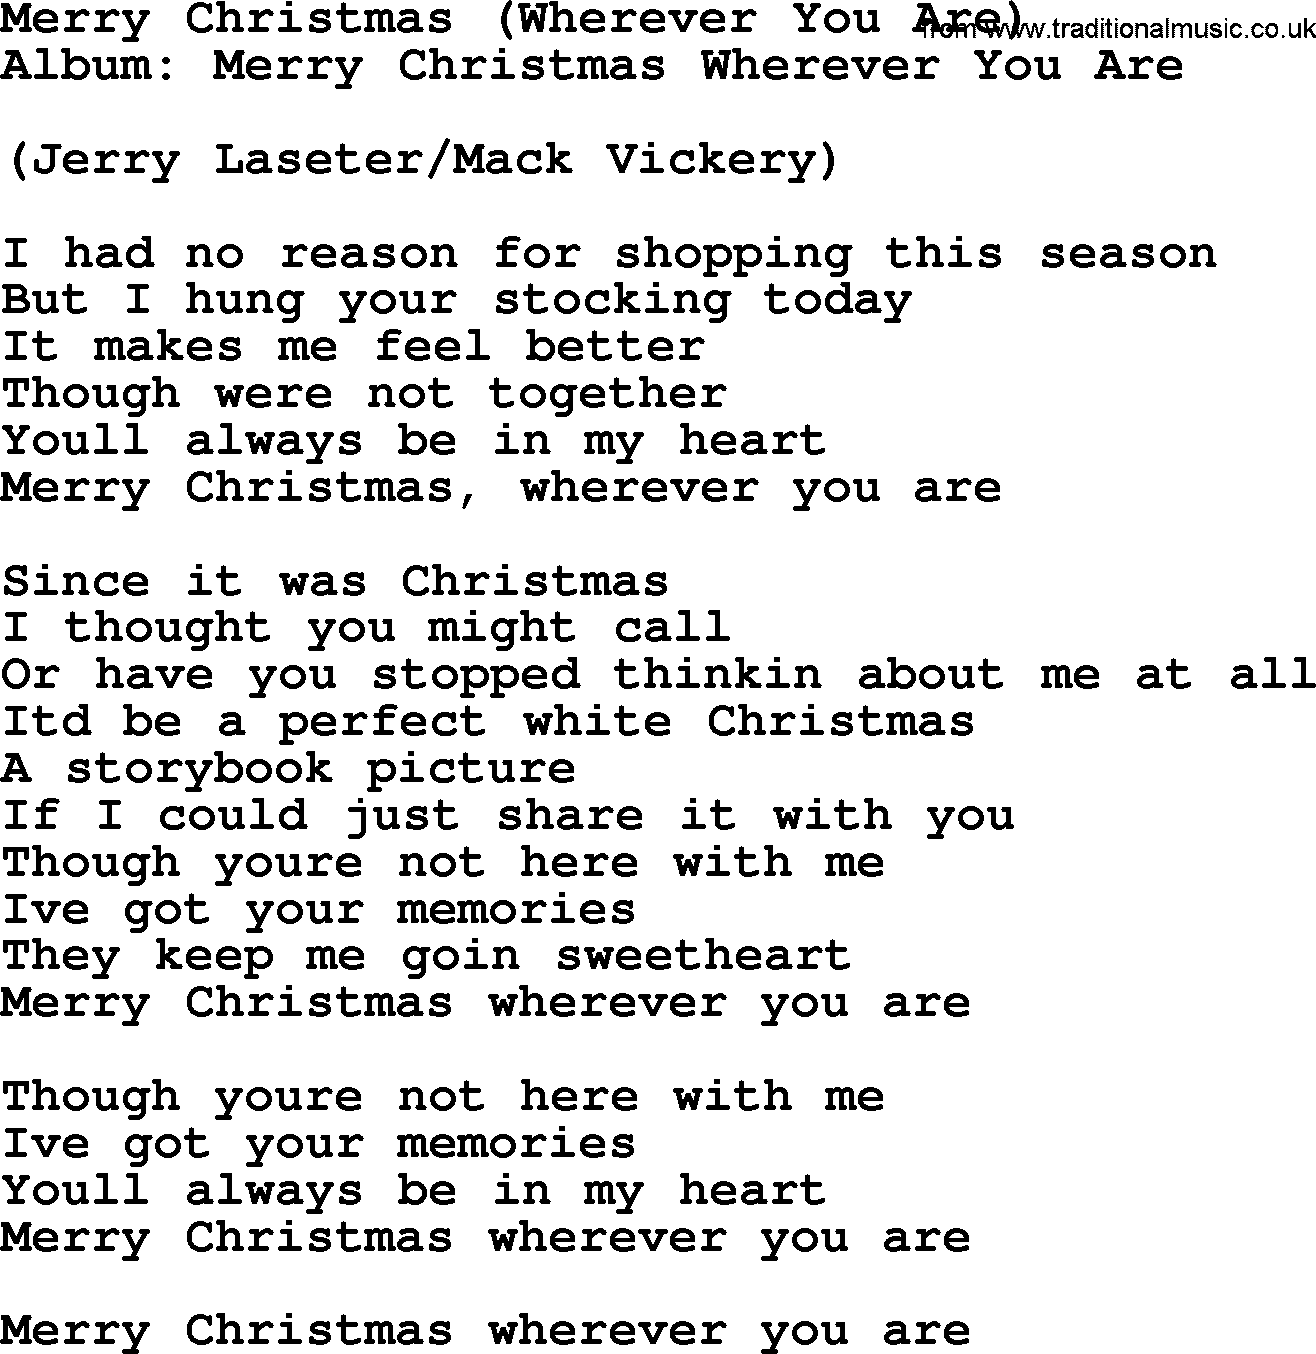 George Strait song: Merry Christmas Wherever You Are, lyrics